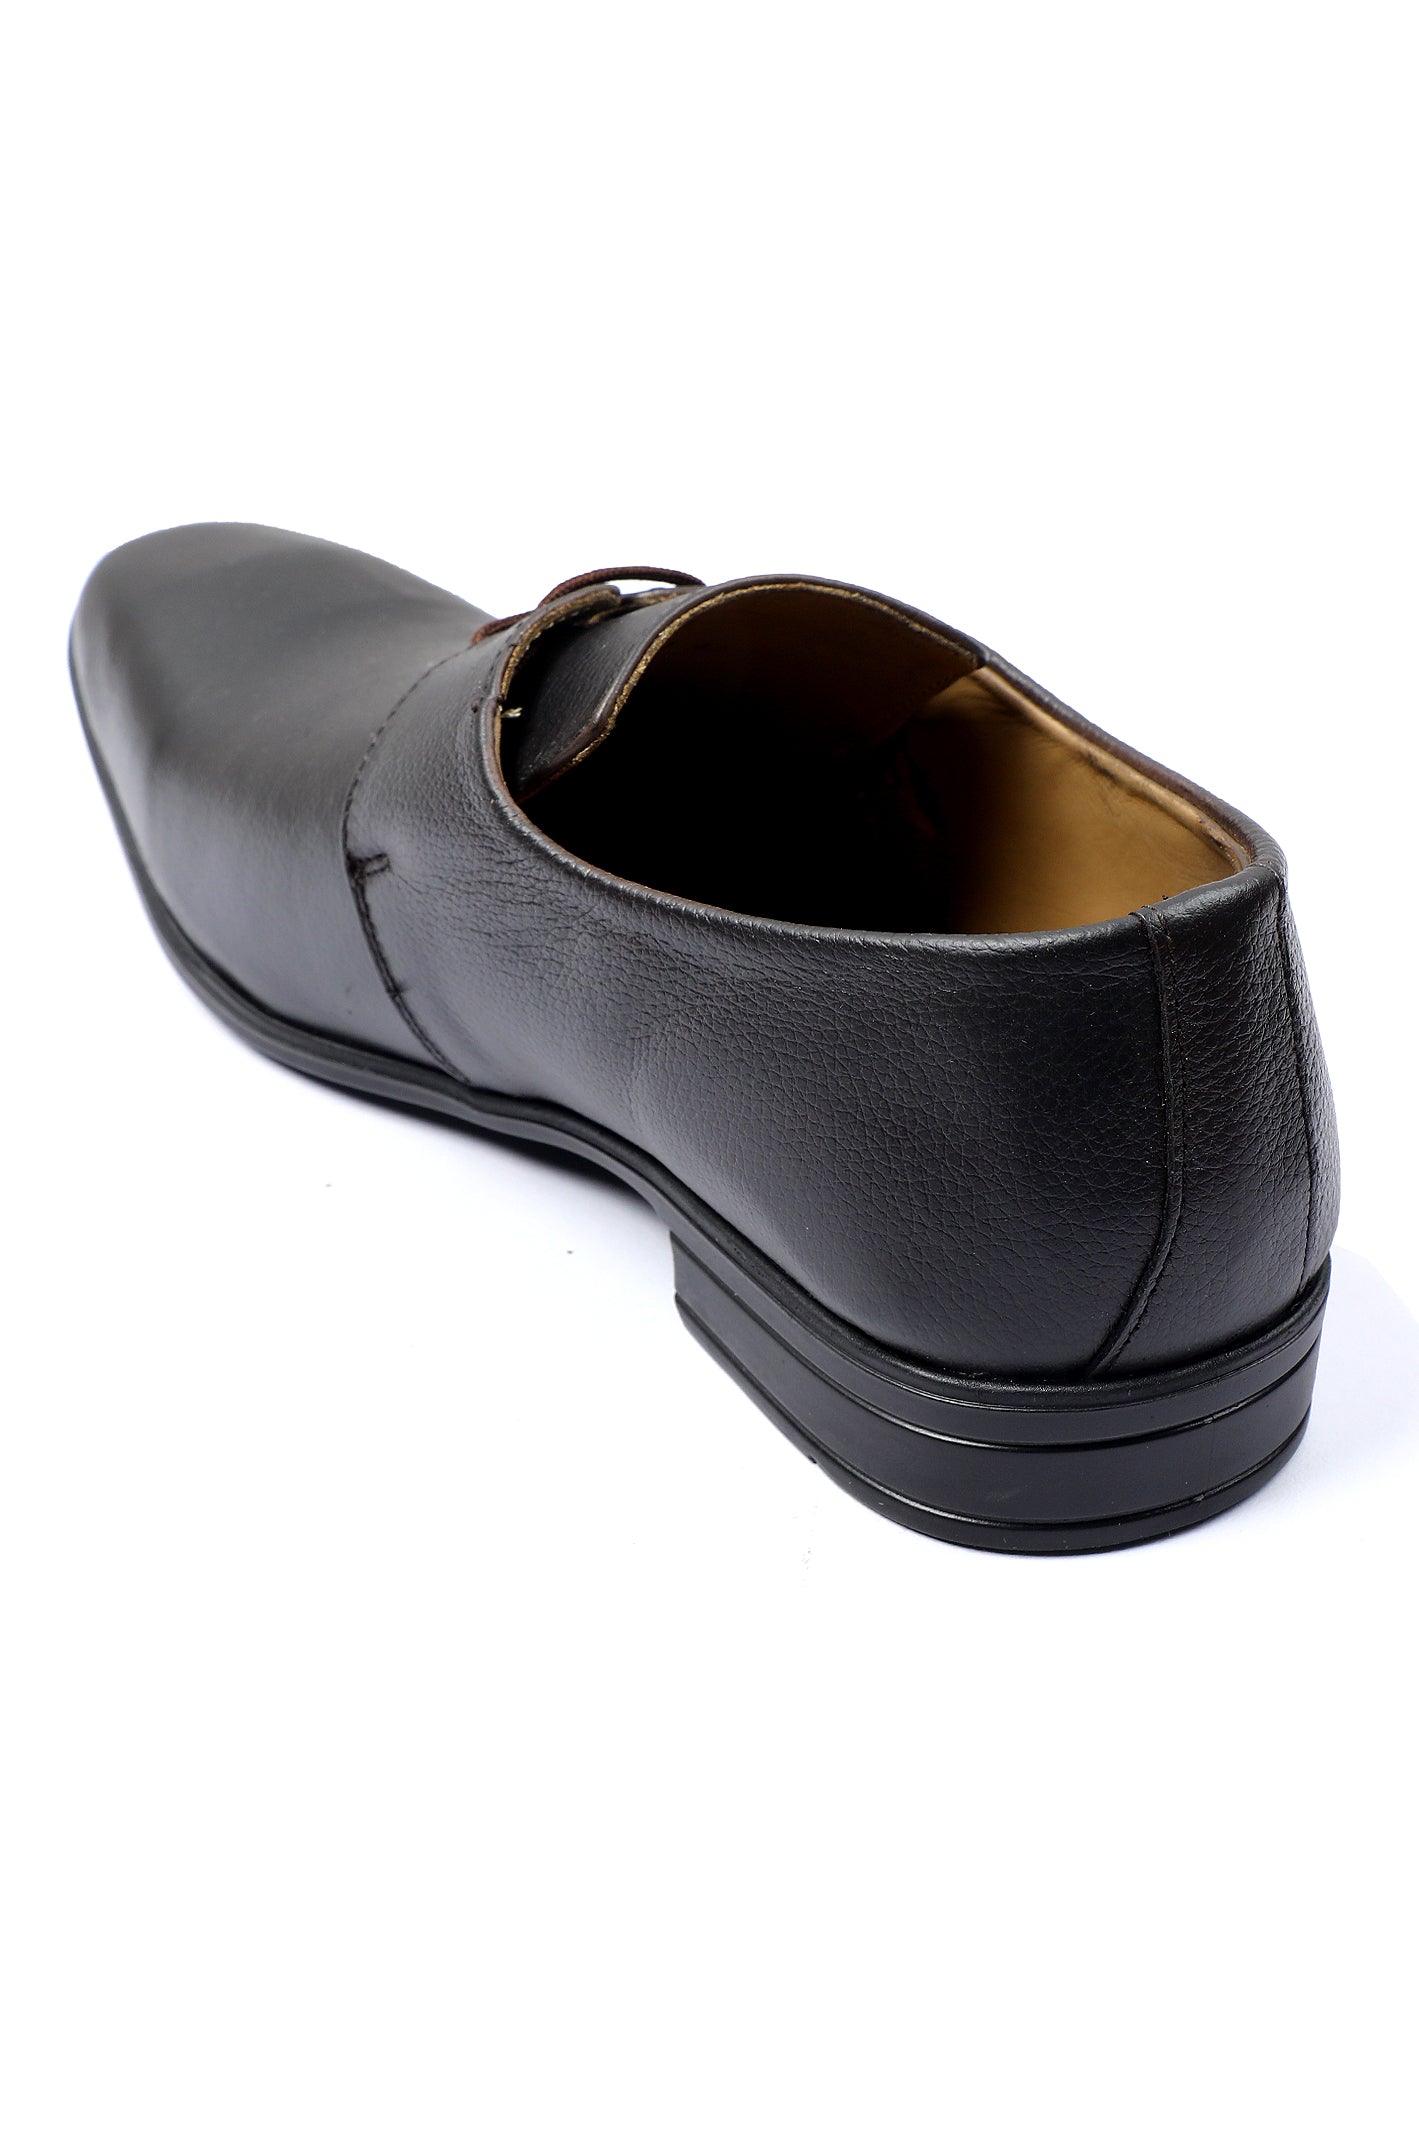 Formal Shoes For Men SKU: SMF-0215-COFFEE - Diners